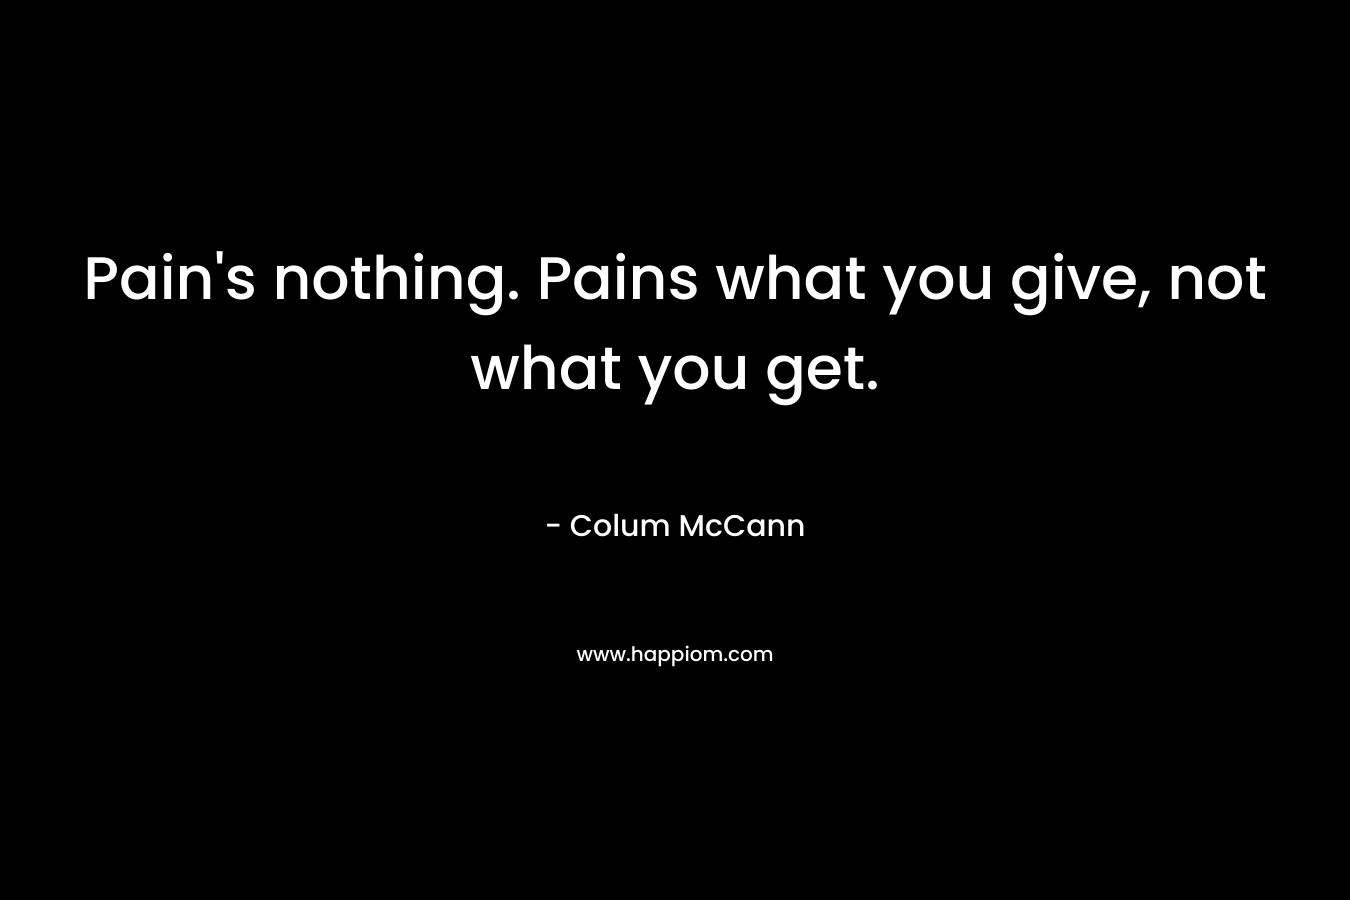 Pain's nothing. Pains what you give, not what you get.